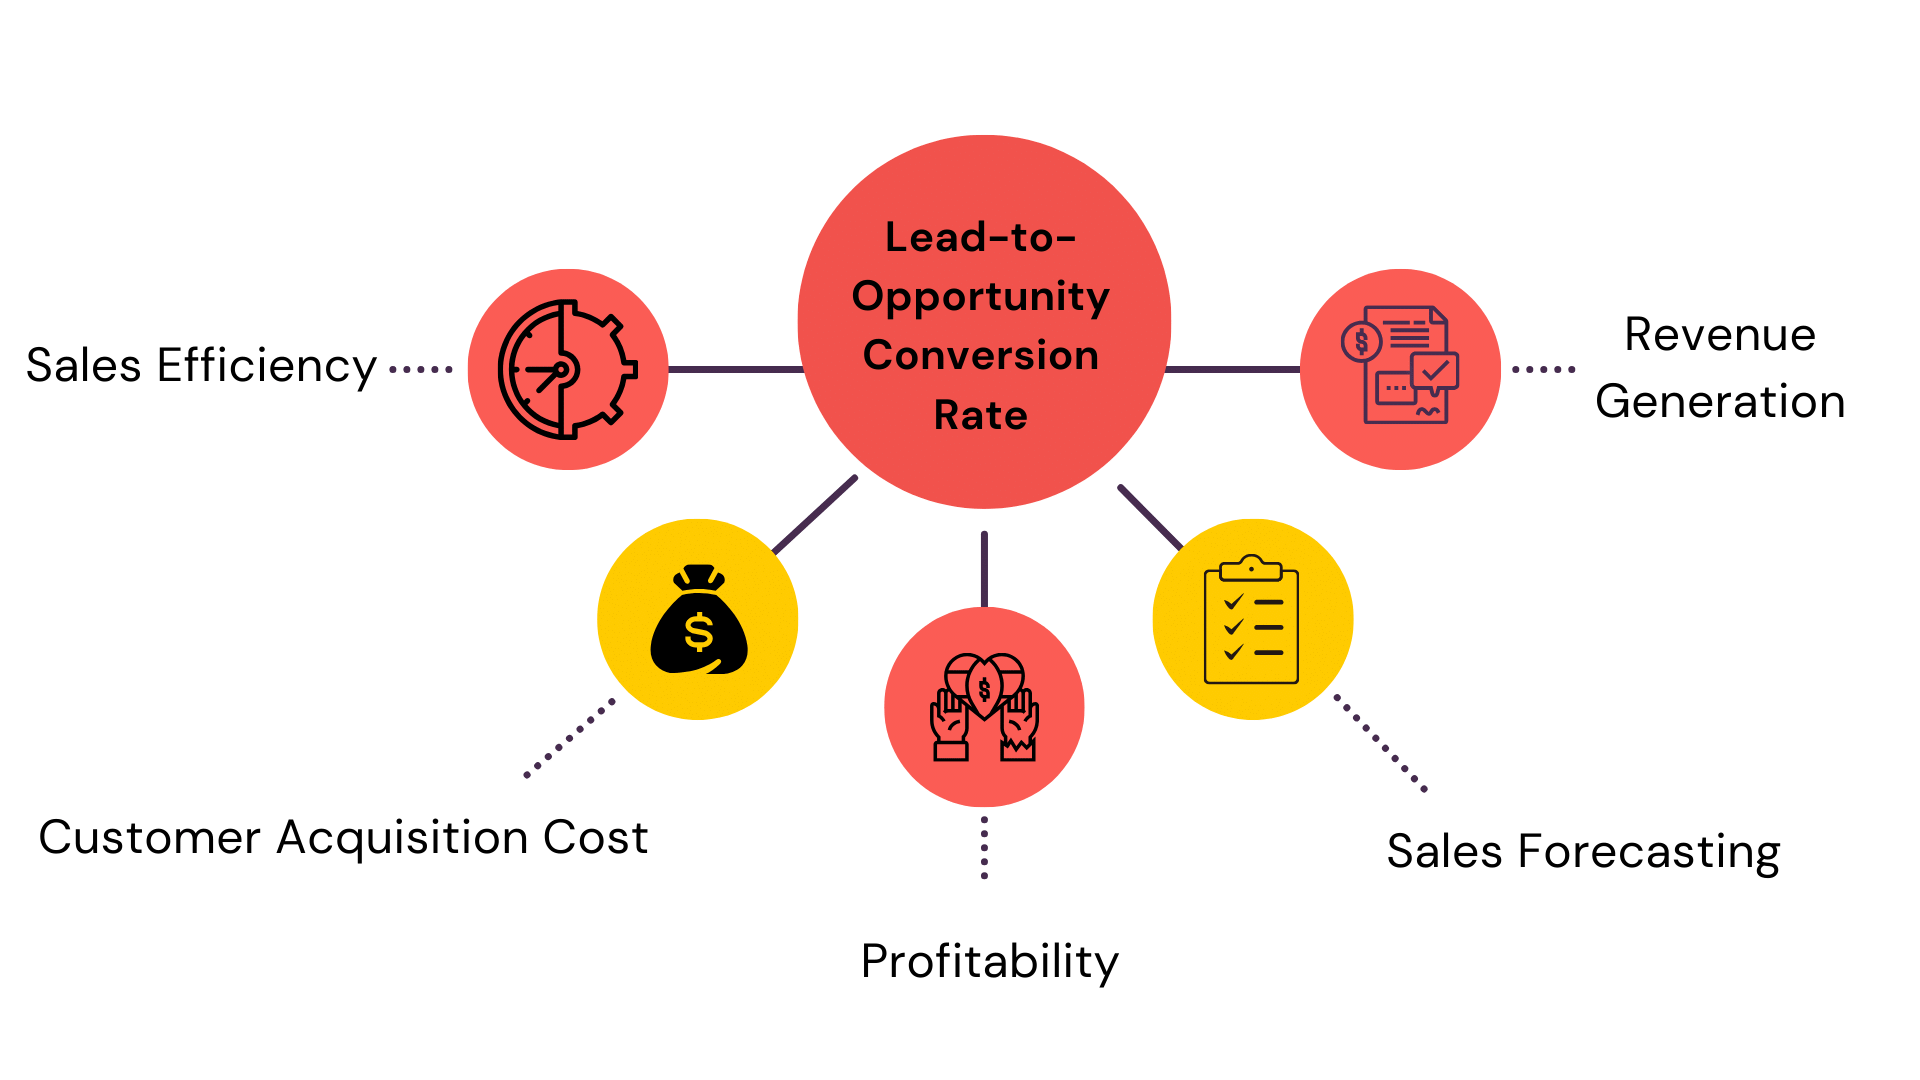 Lead-to-Opportunity Conversion Rate